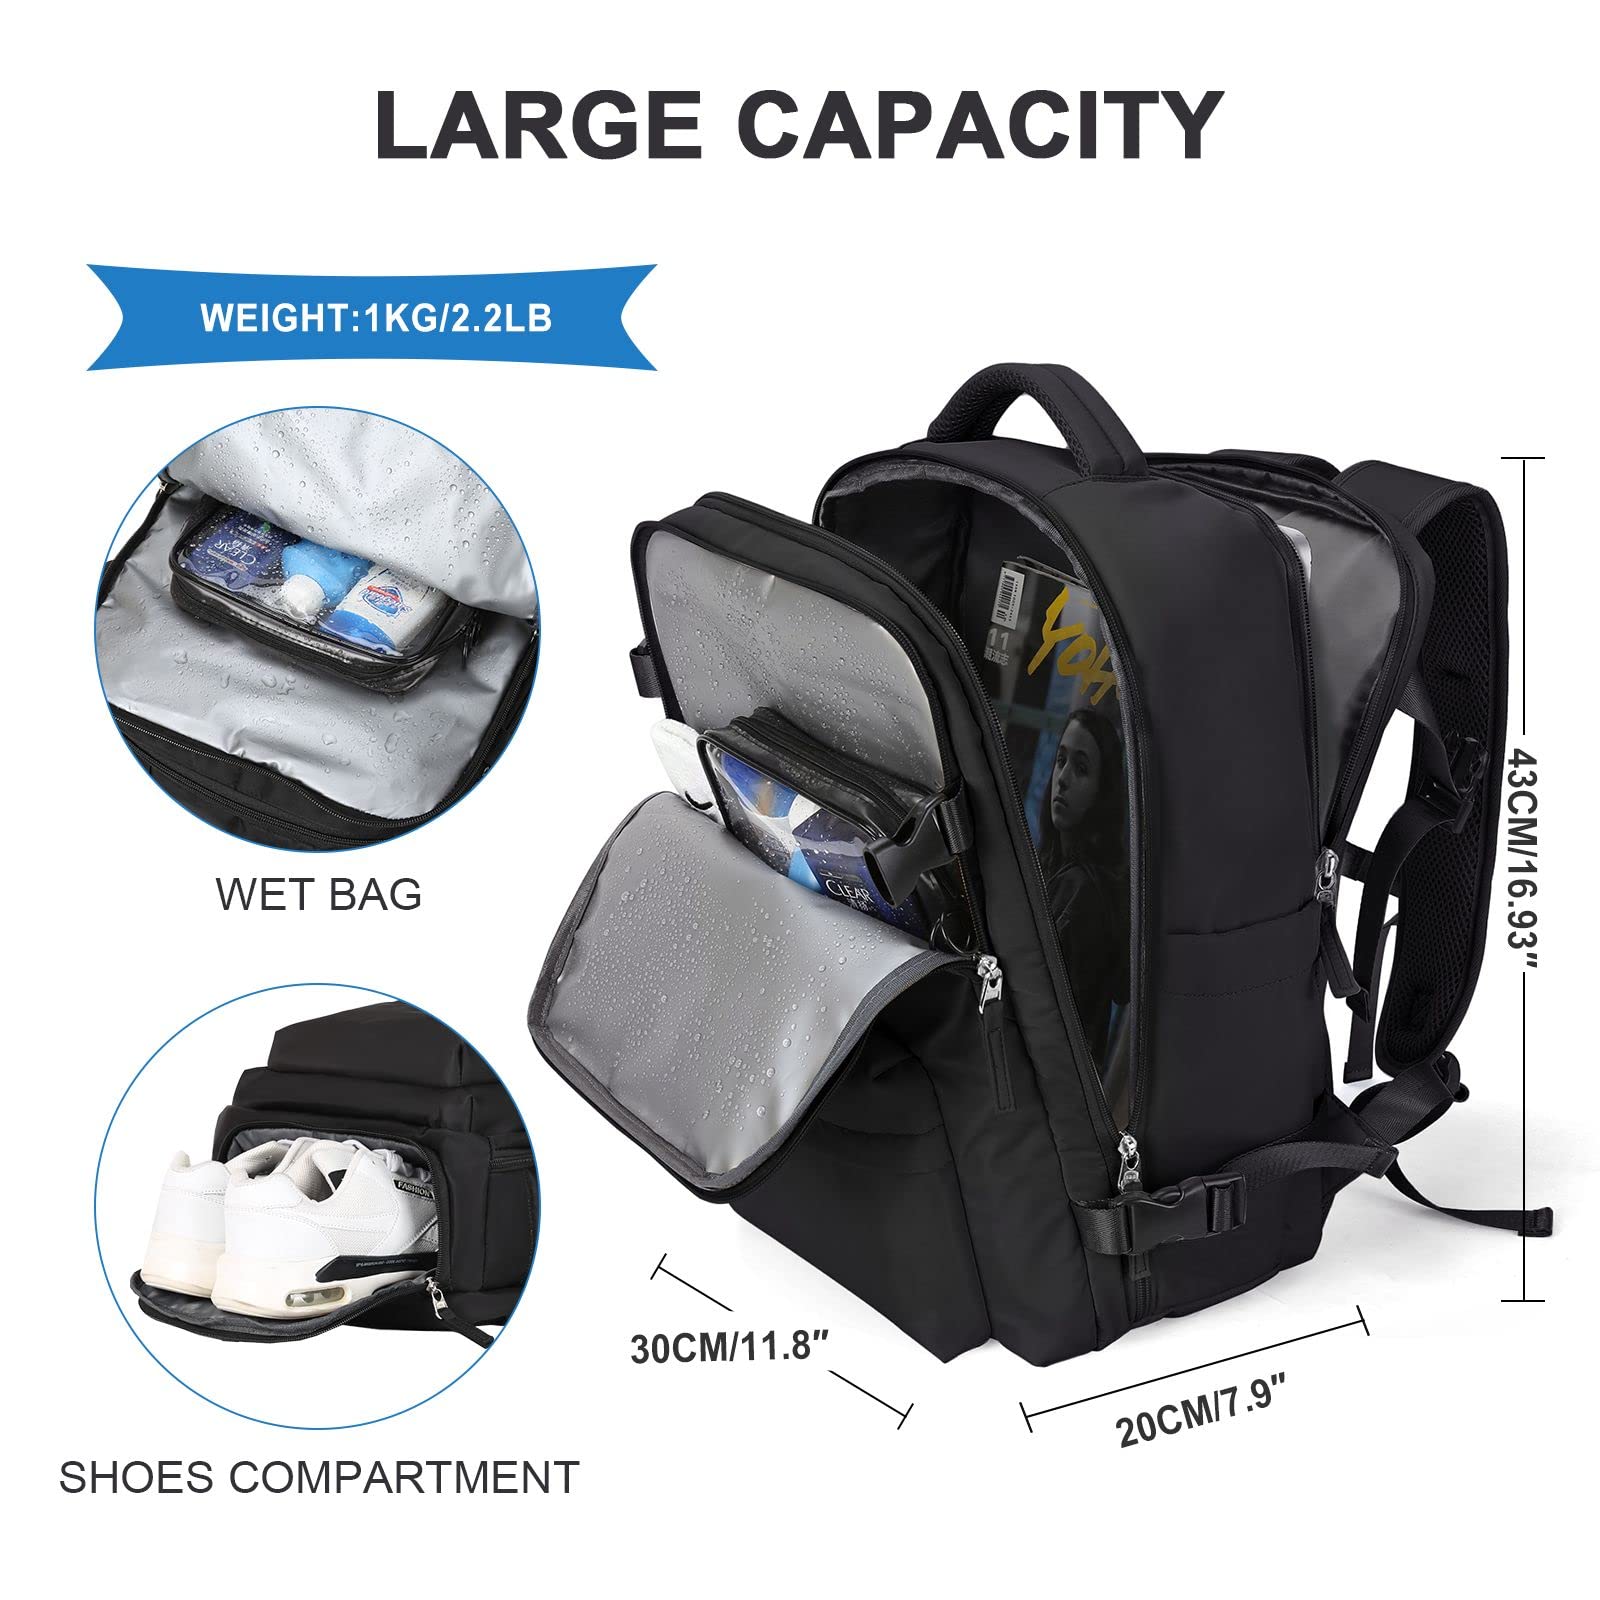 Large Travel Backpack Women, Carry On Backpack,Hiking Backpack Waterproof Outdoor Sports Rucksack Casual Daypack Fit 14 Inch Laptop with USB Charging Port Shoes Compartment, Black